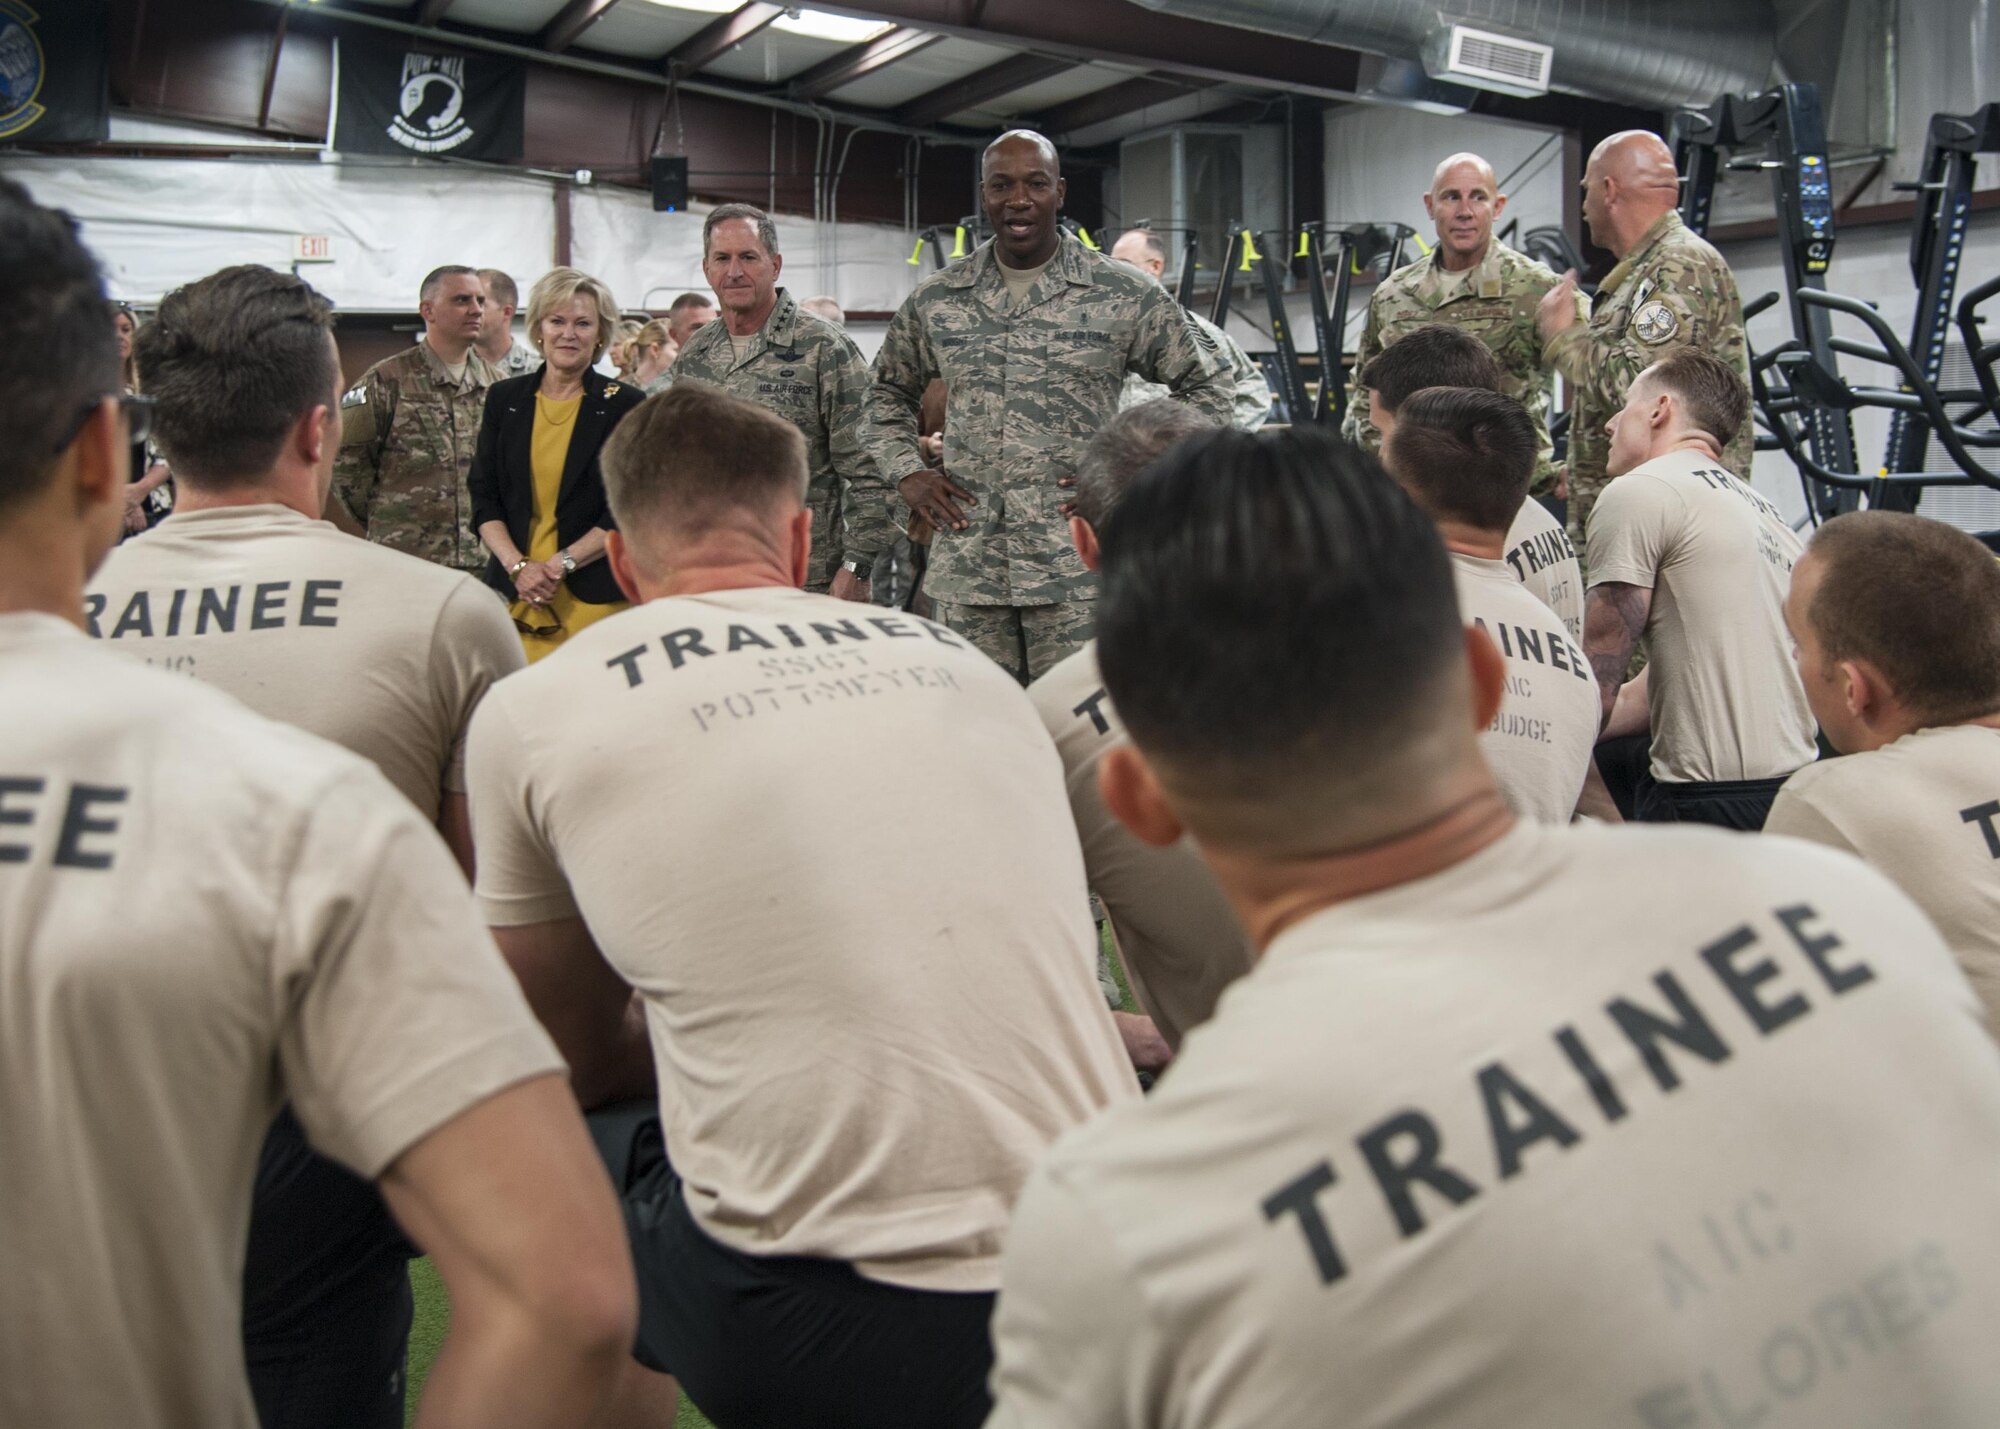 U.S. Air Force Chief of Staff Gen. David L. Goldfein and Chief Master Sergeant of the Air Force Kaleth O. Wright speak to trainees from the 351st Battlefield Airmen Training Squadron at Kirtland Air Force Base, N.M., Oct. 20.